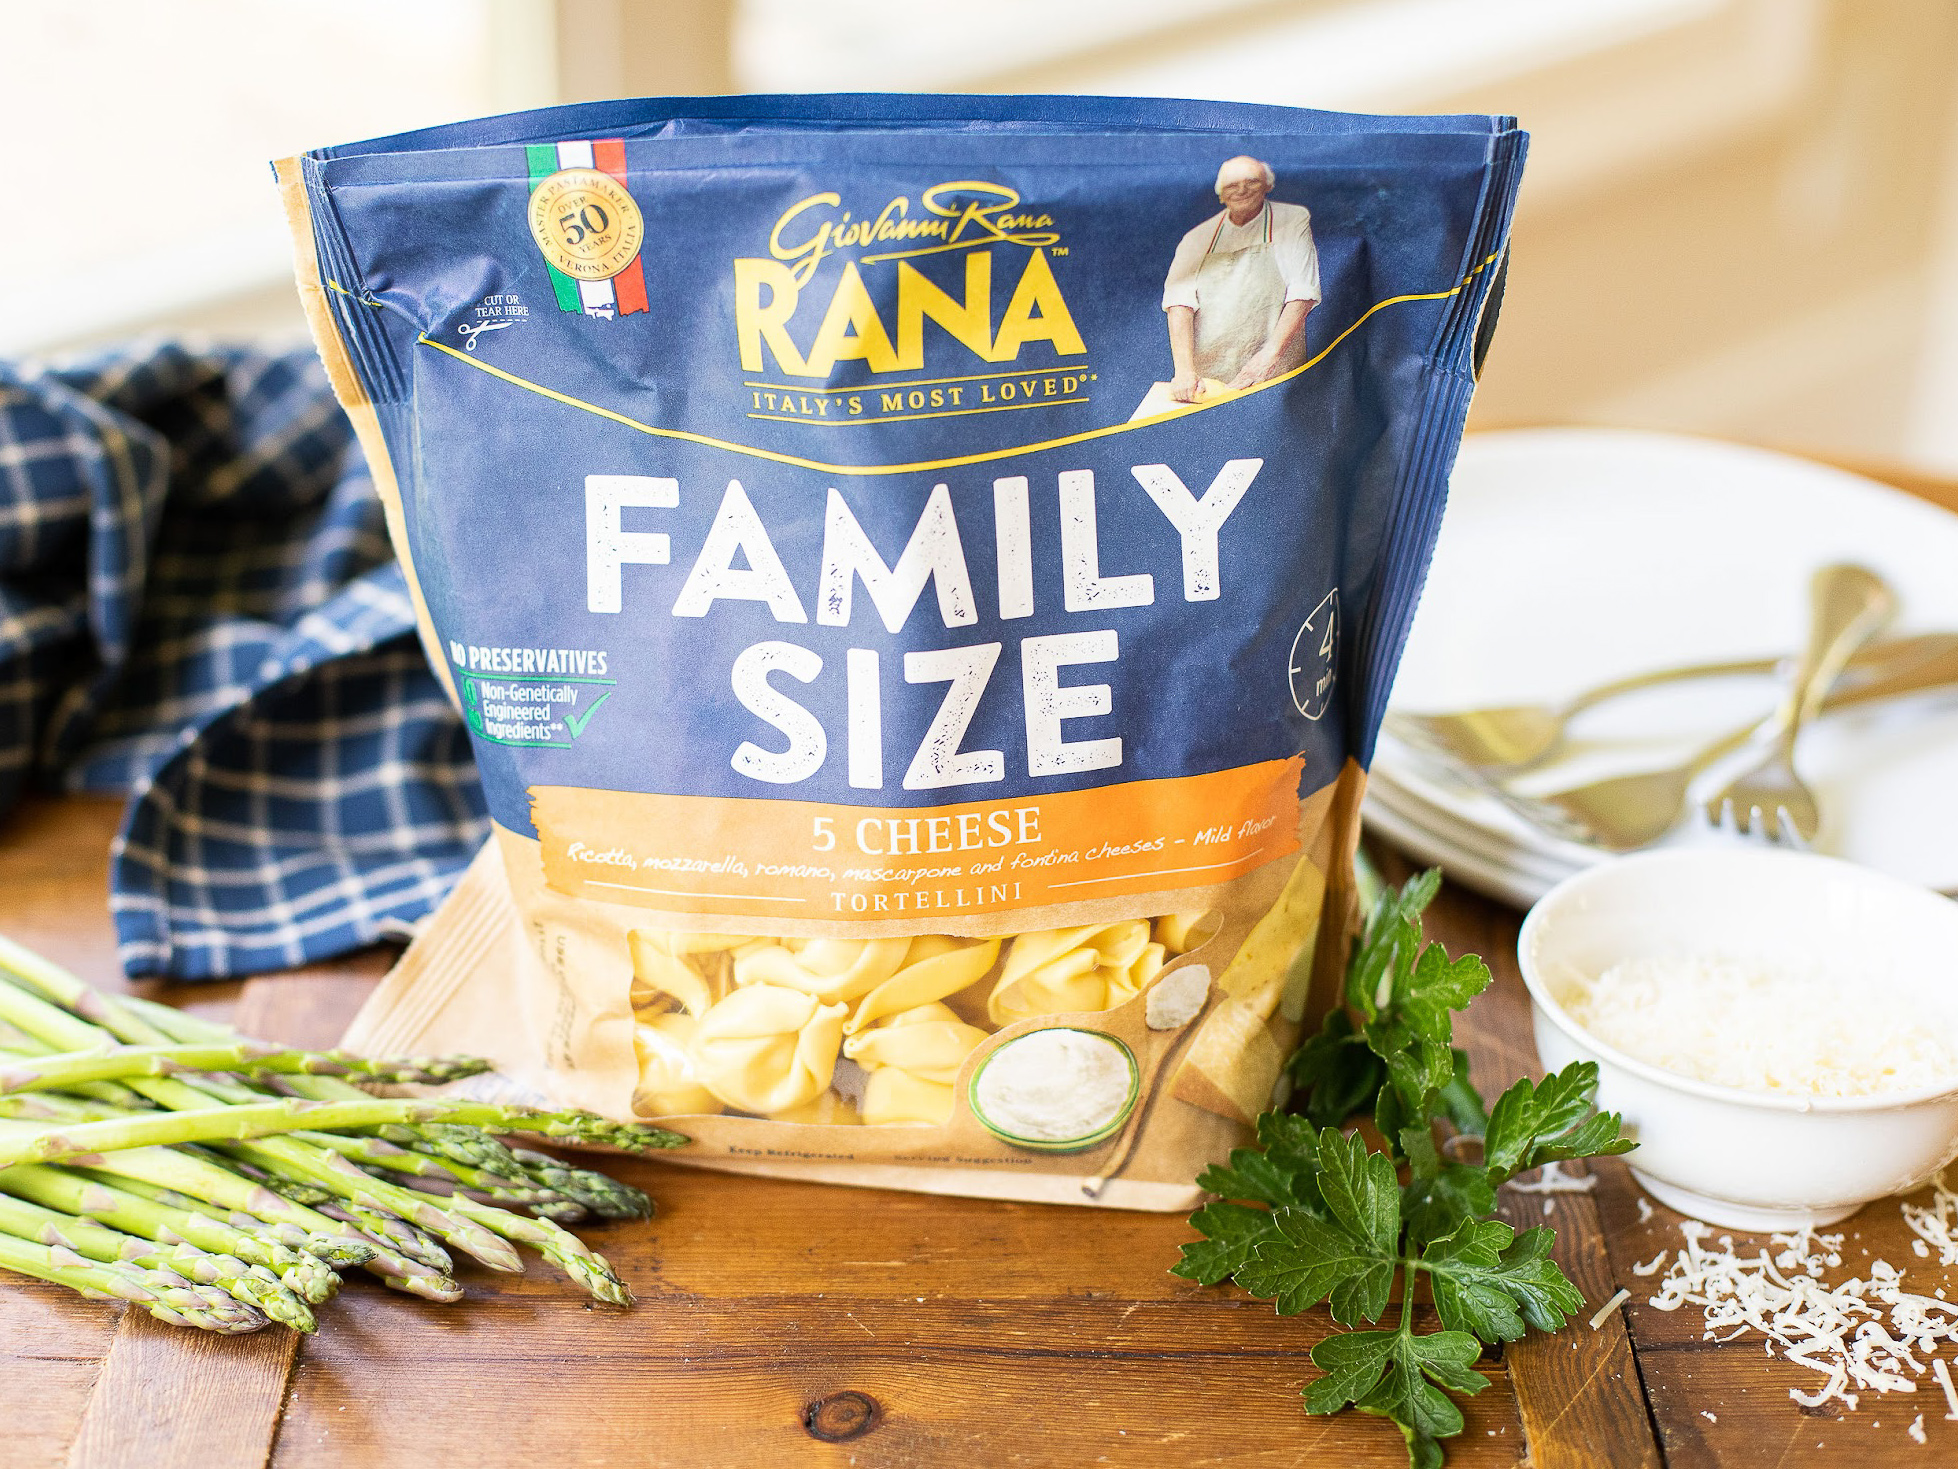 Rana Family Size Pasta Only $5.34 At Publix (Regular Price $7.49)